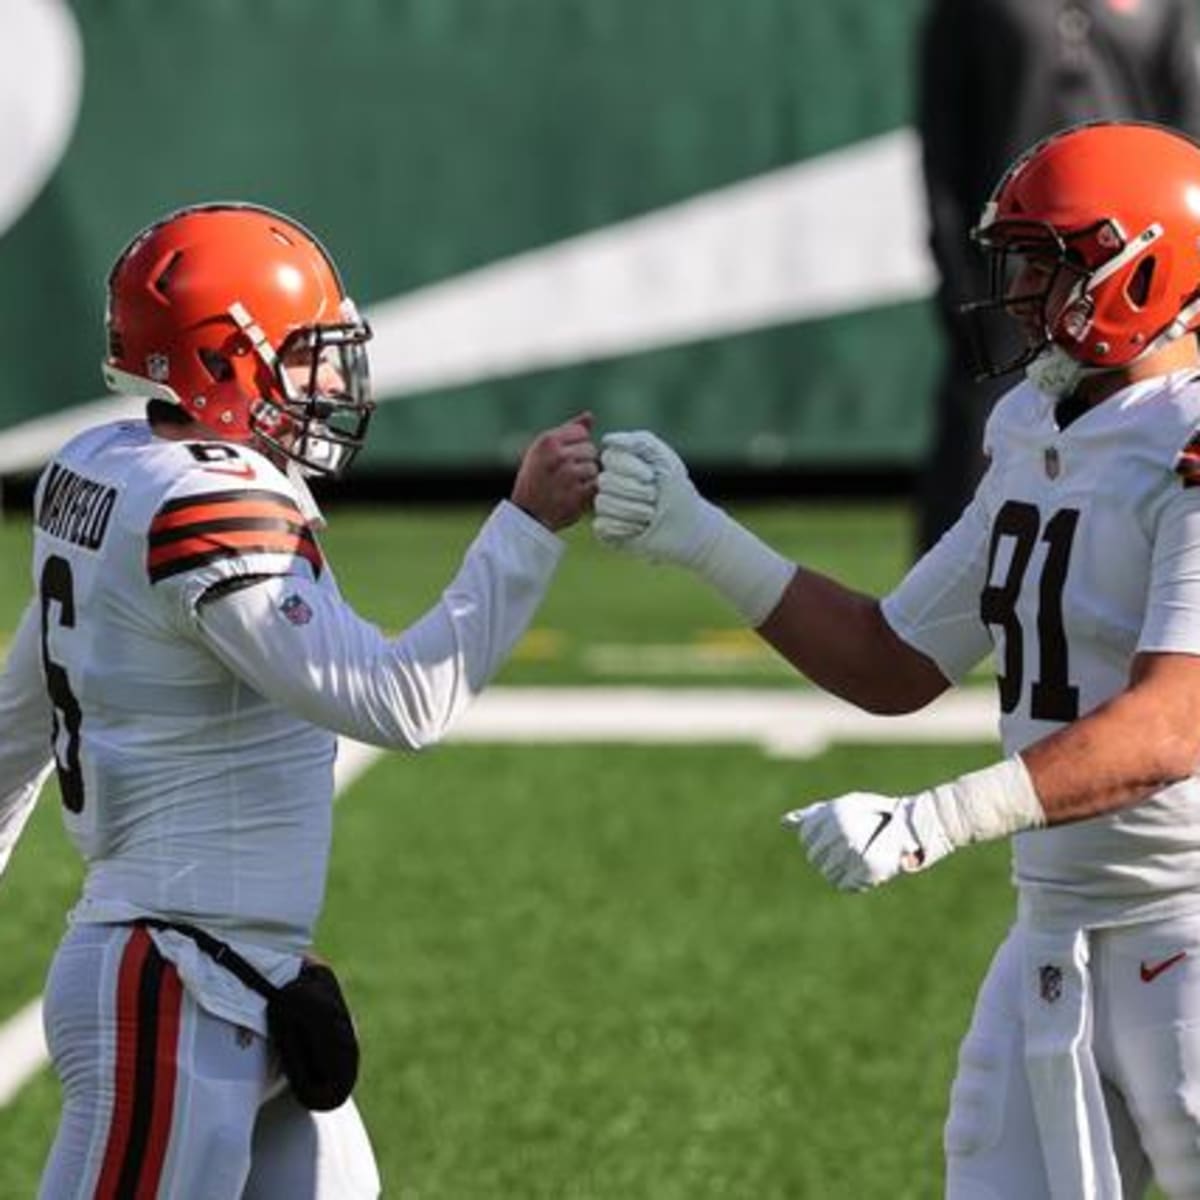 A game-by-game look at the 2021 Browns schedule